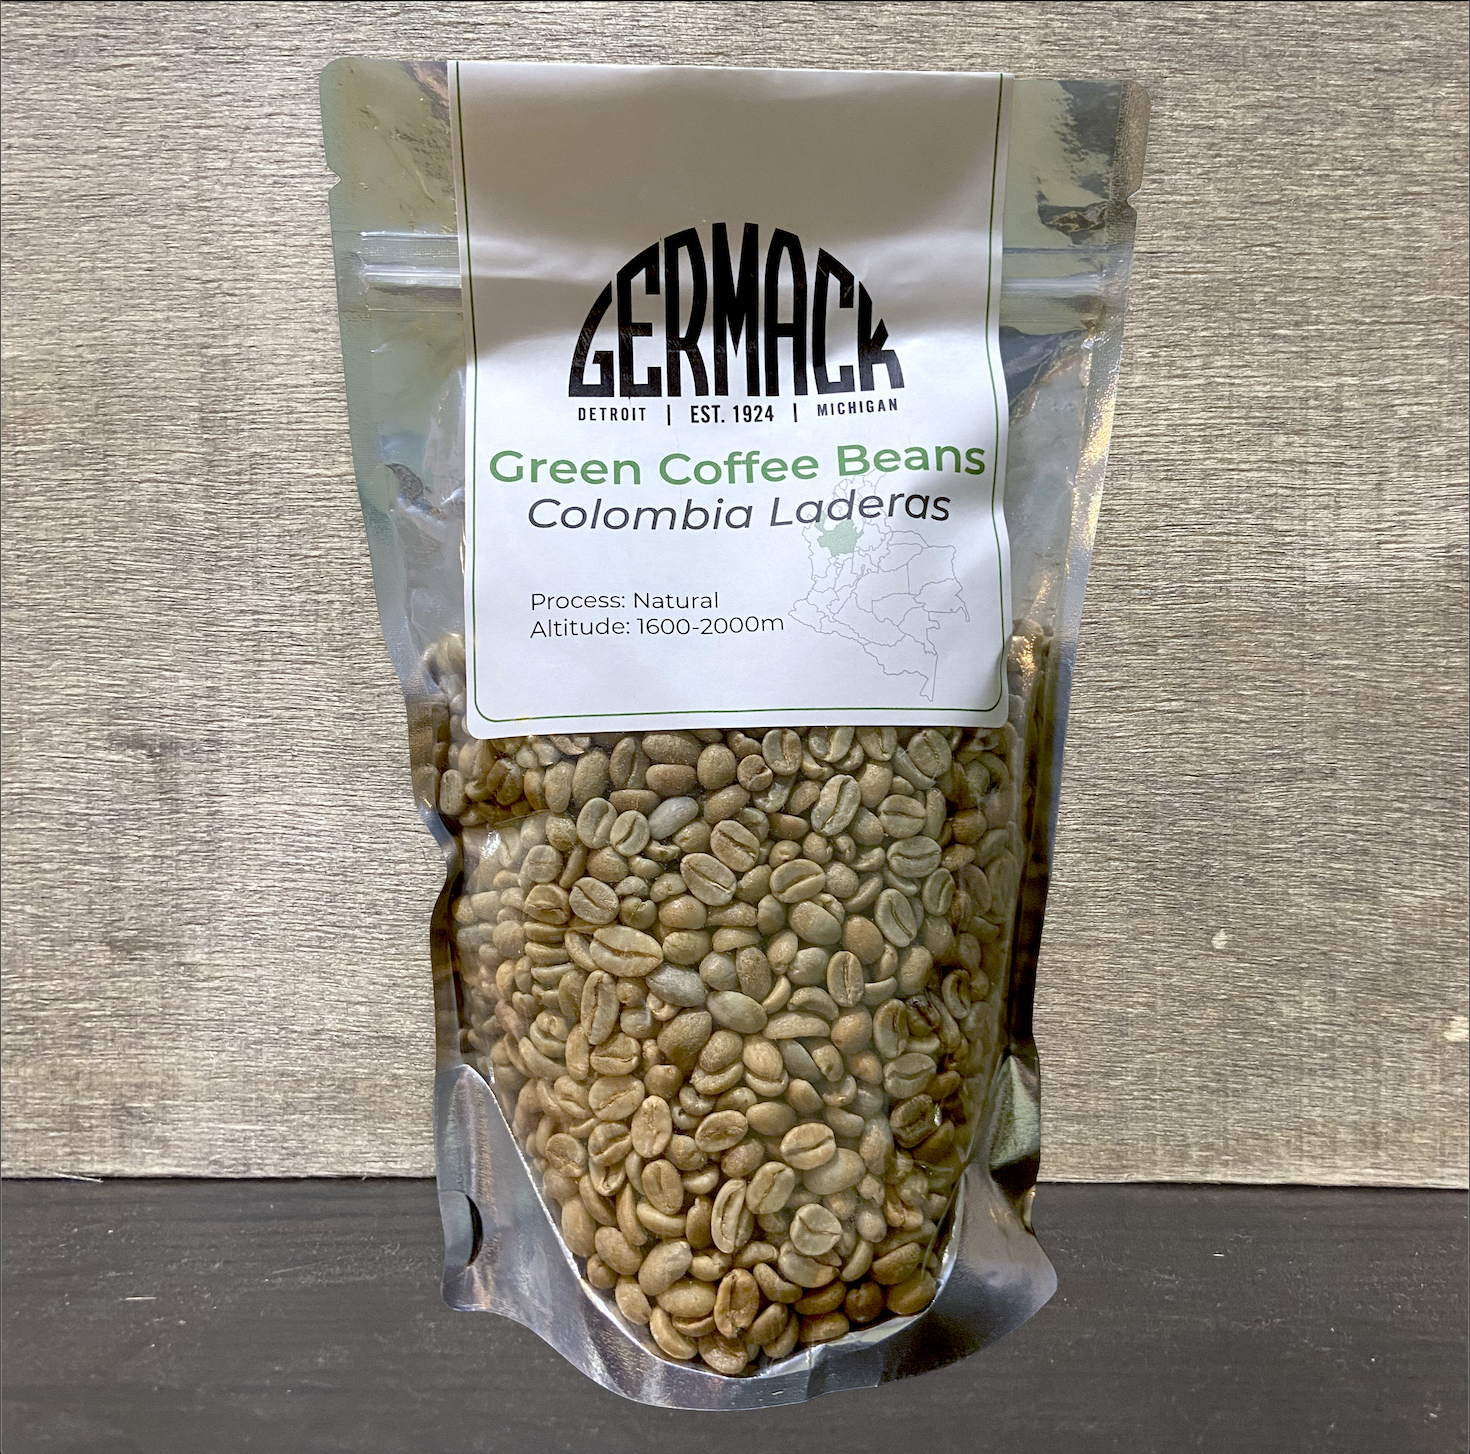 Picture Germack Green Coffee Beans (1 lb) - Colombia Laderas